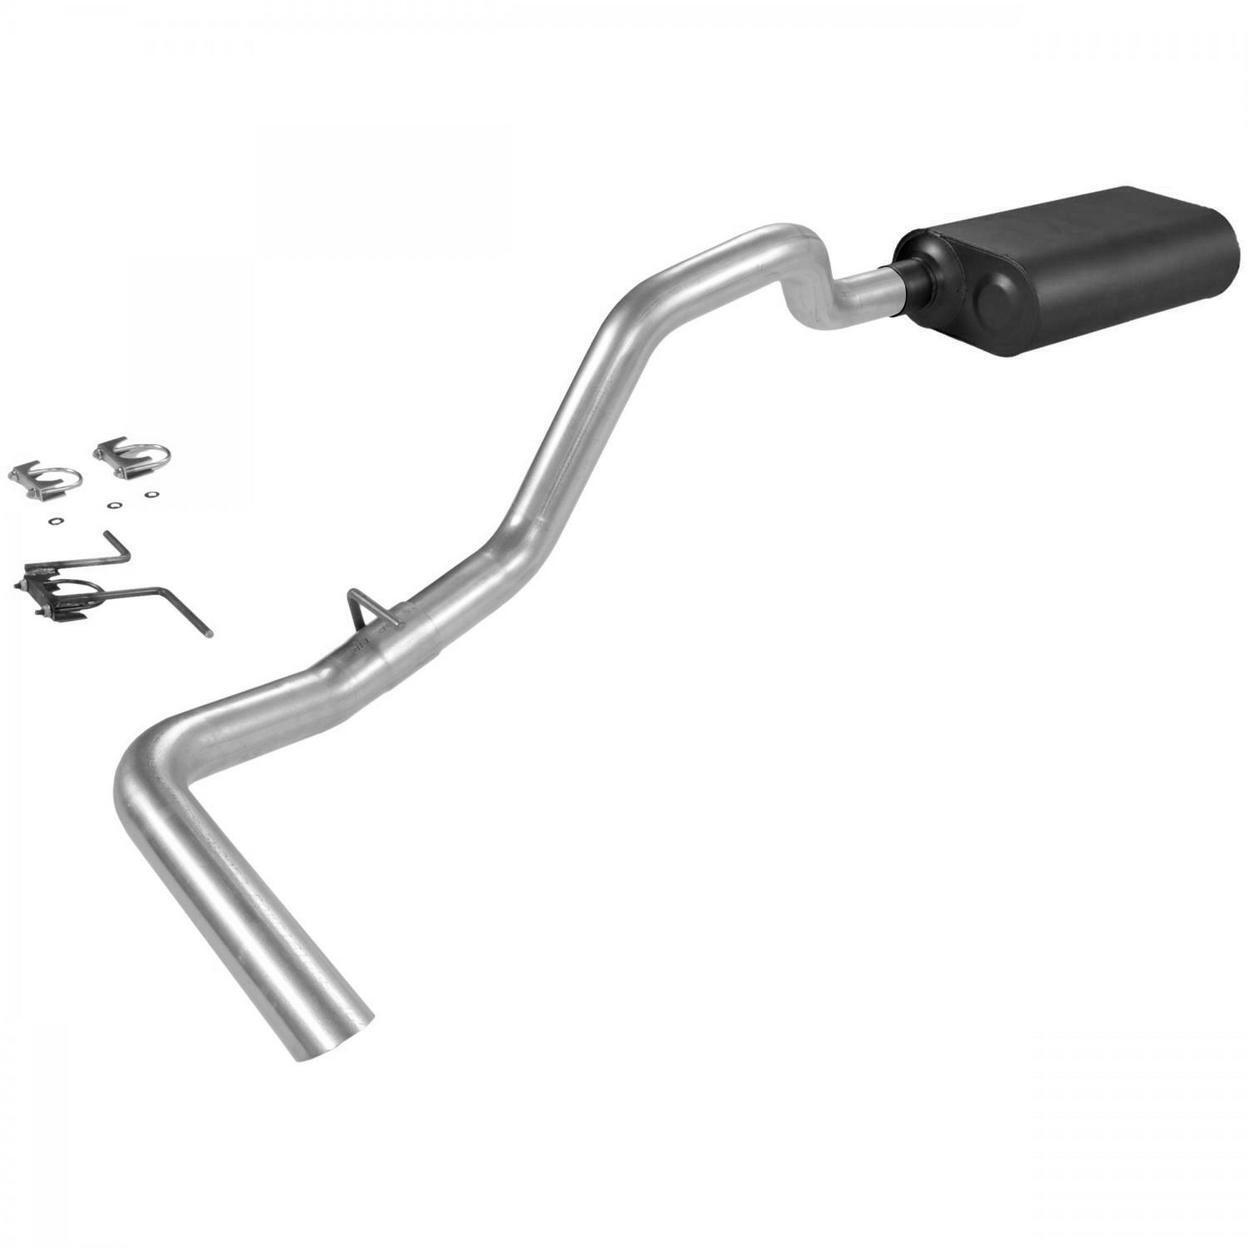 Flowmaster Exhaust System Kit - Fits 1987 to 1996 Ford Bronco with a 5.0L or 5.8